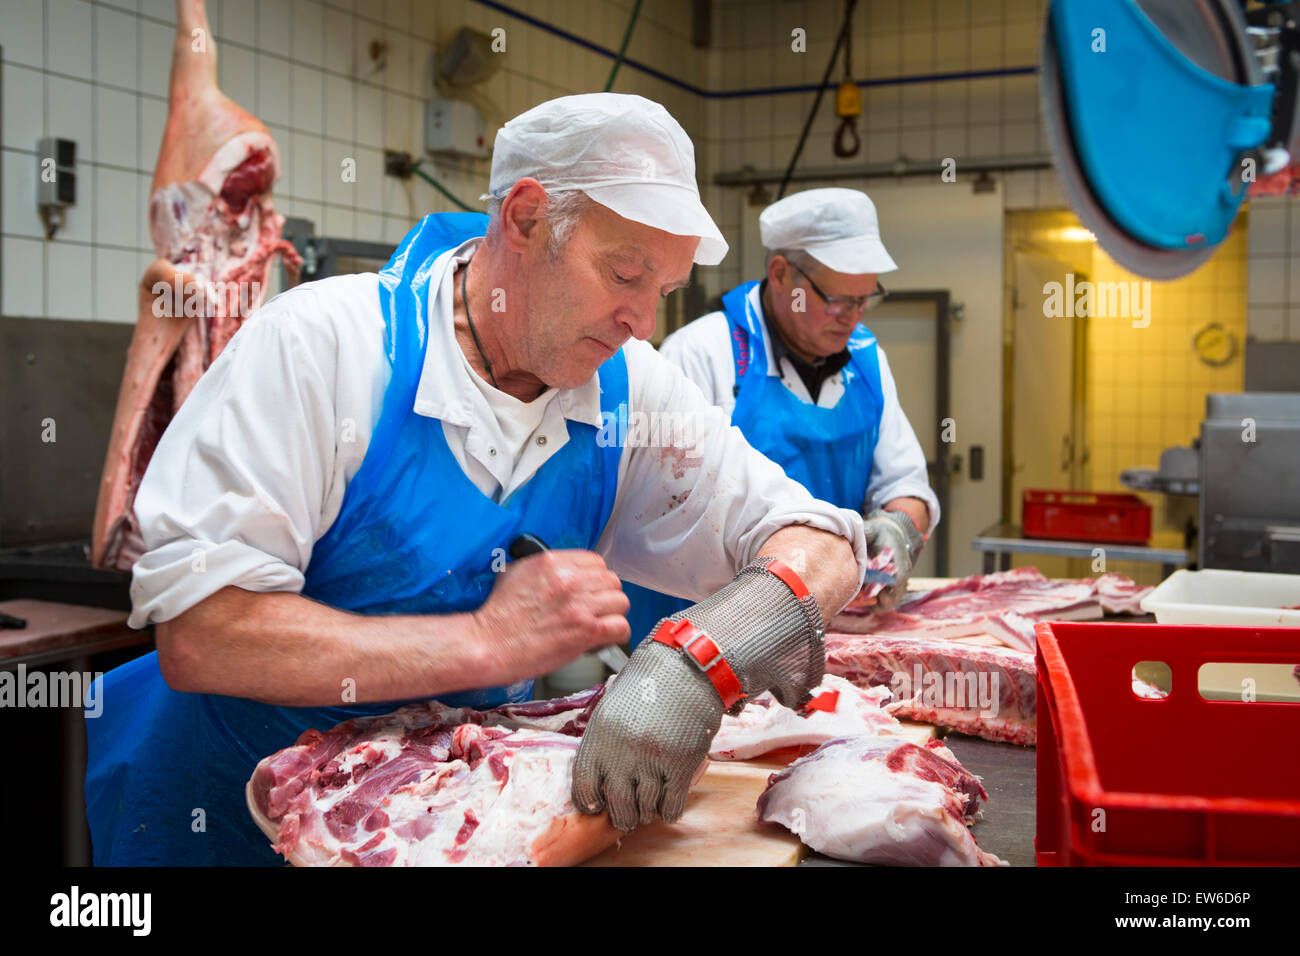 Two butchers cutting pork meat at the butchery Stock Photo